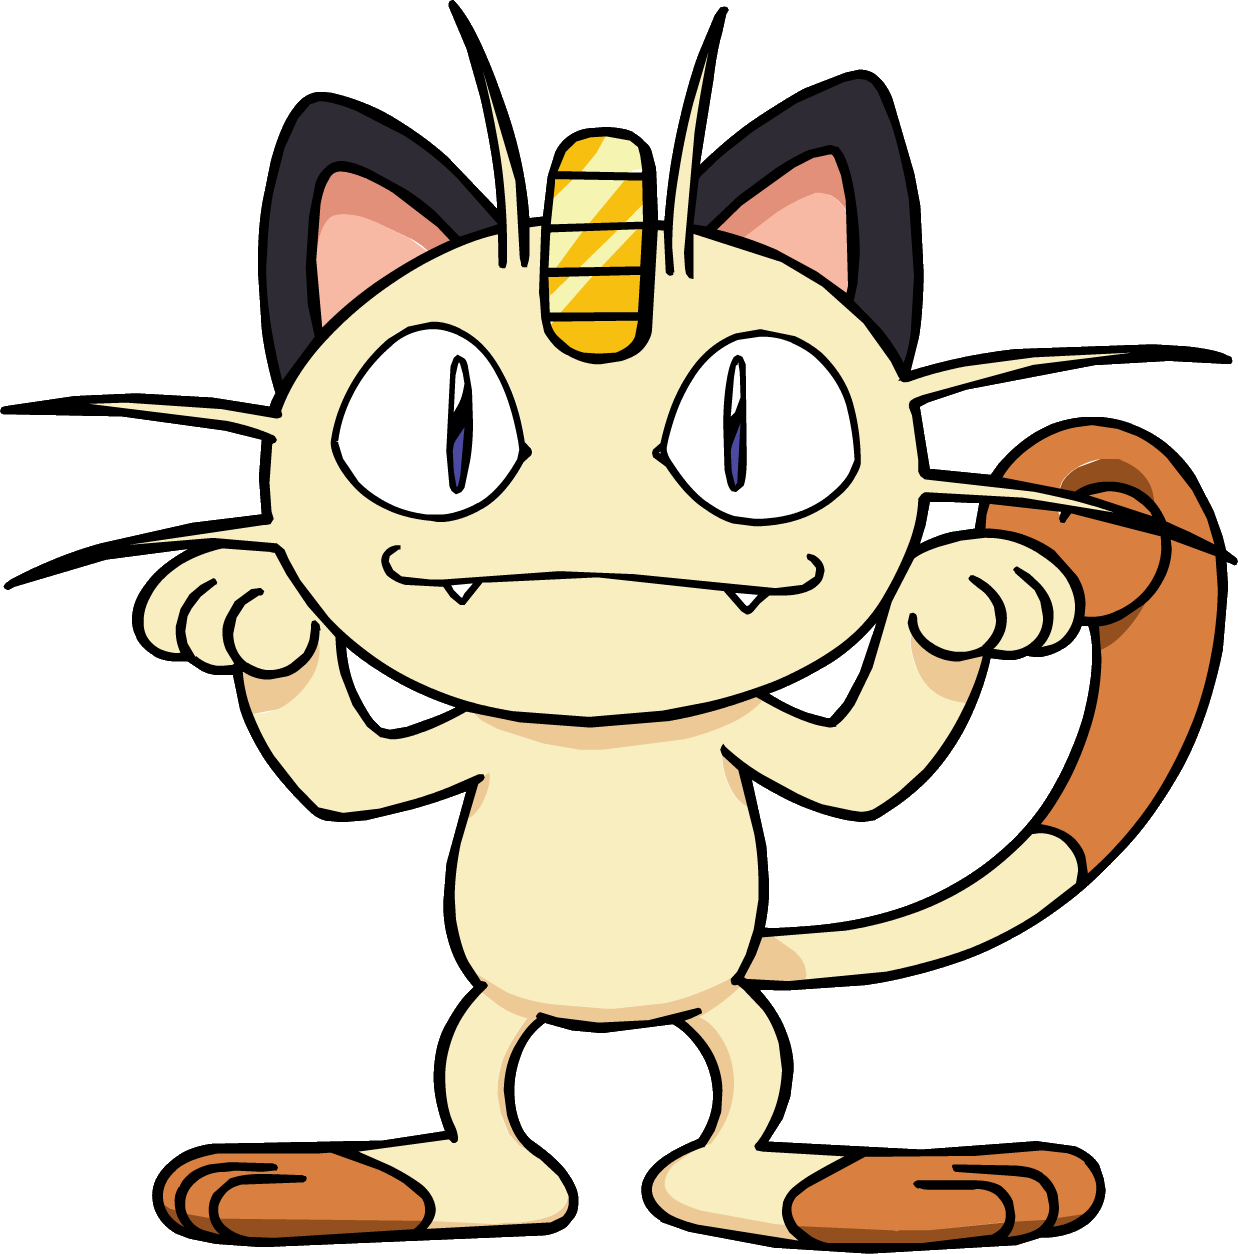 This Image Has Been Resized - Meowth From Pokemon (1238x1254)